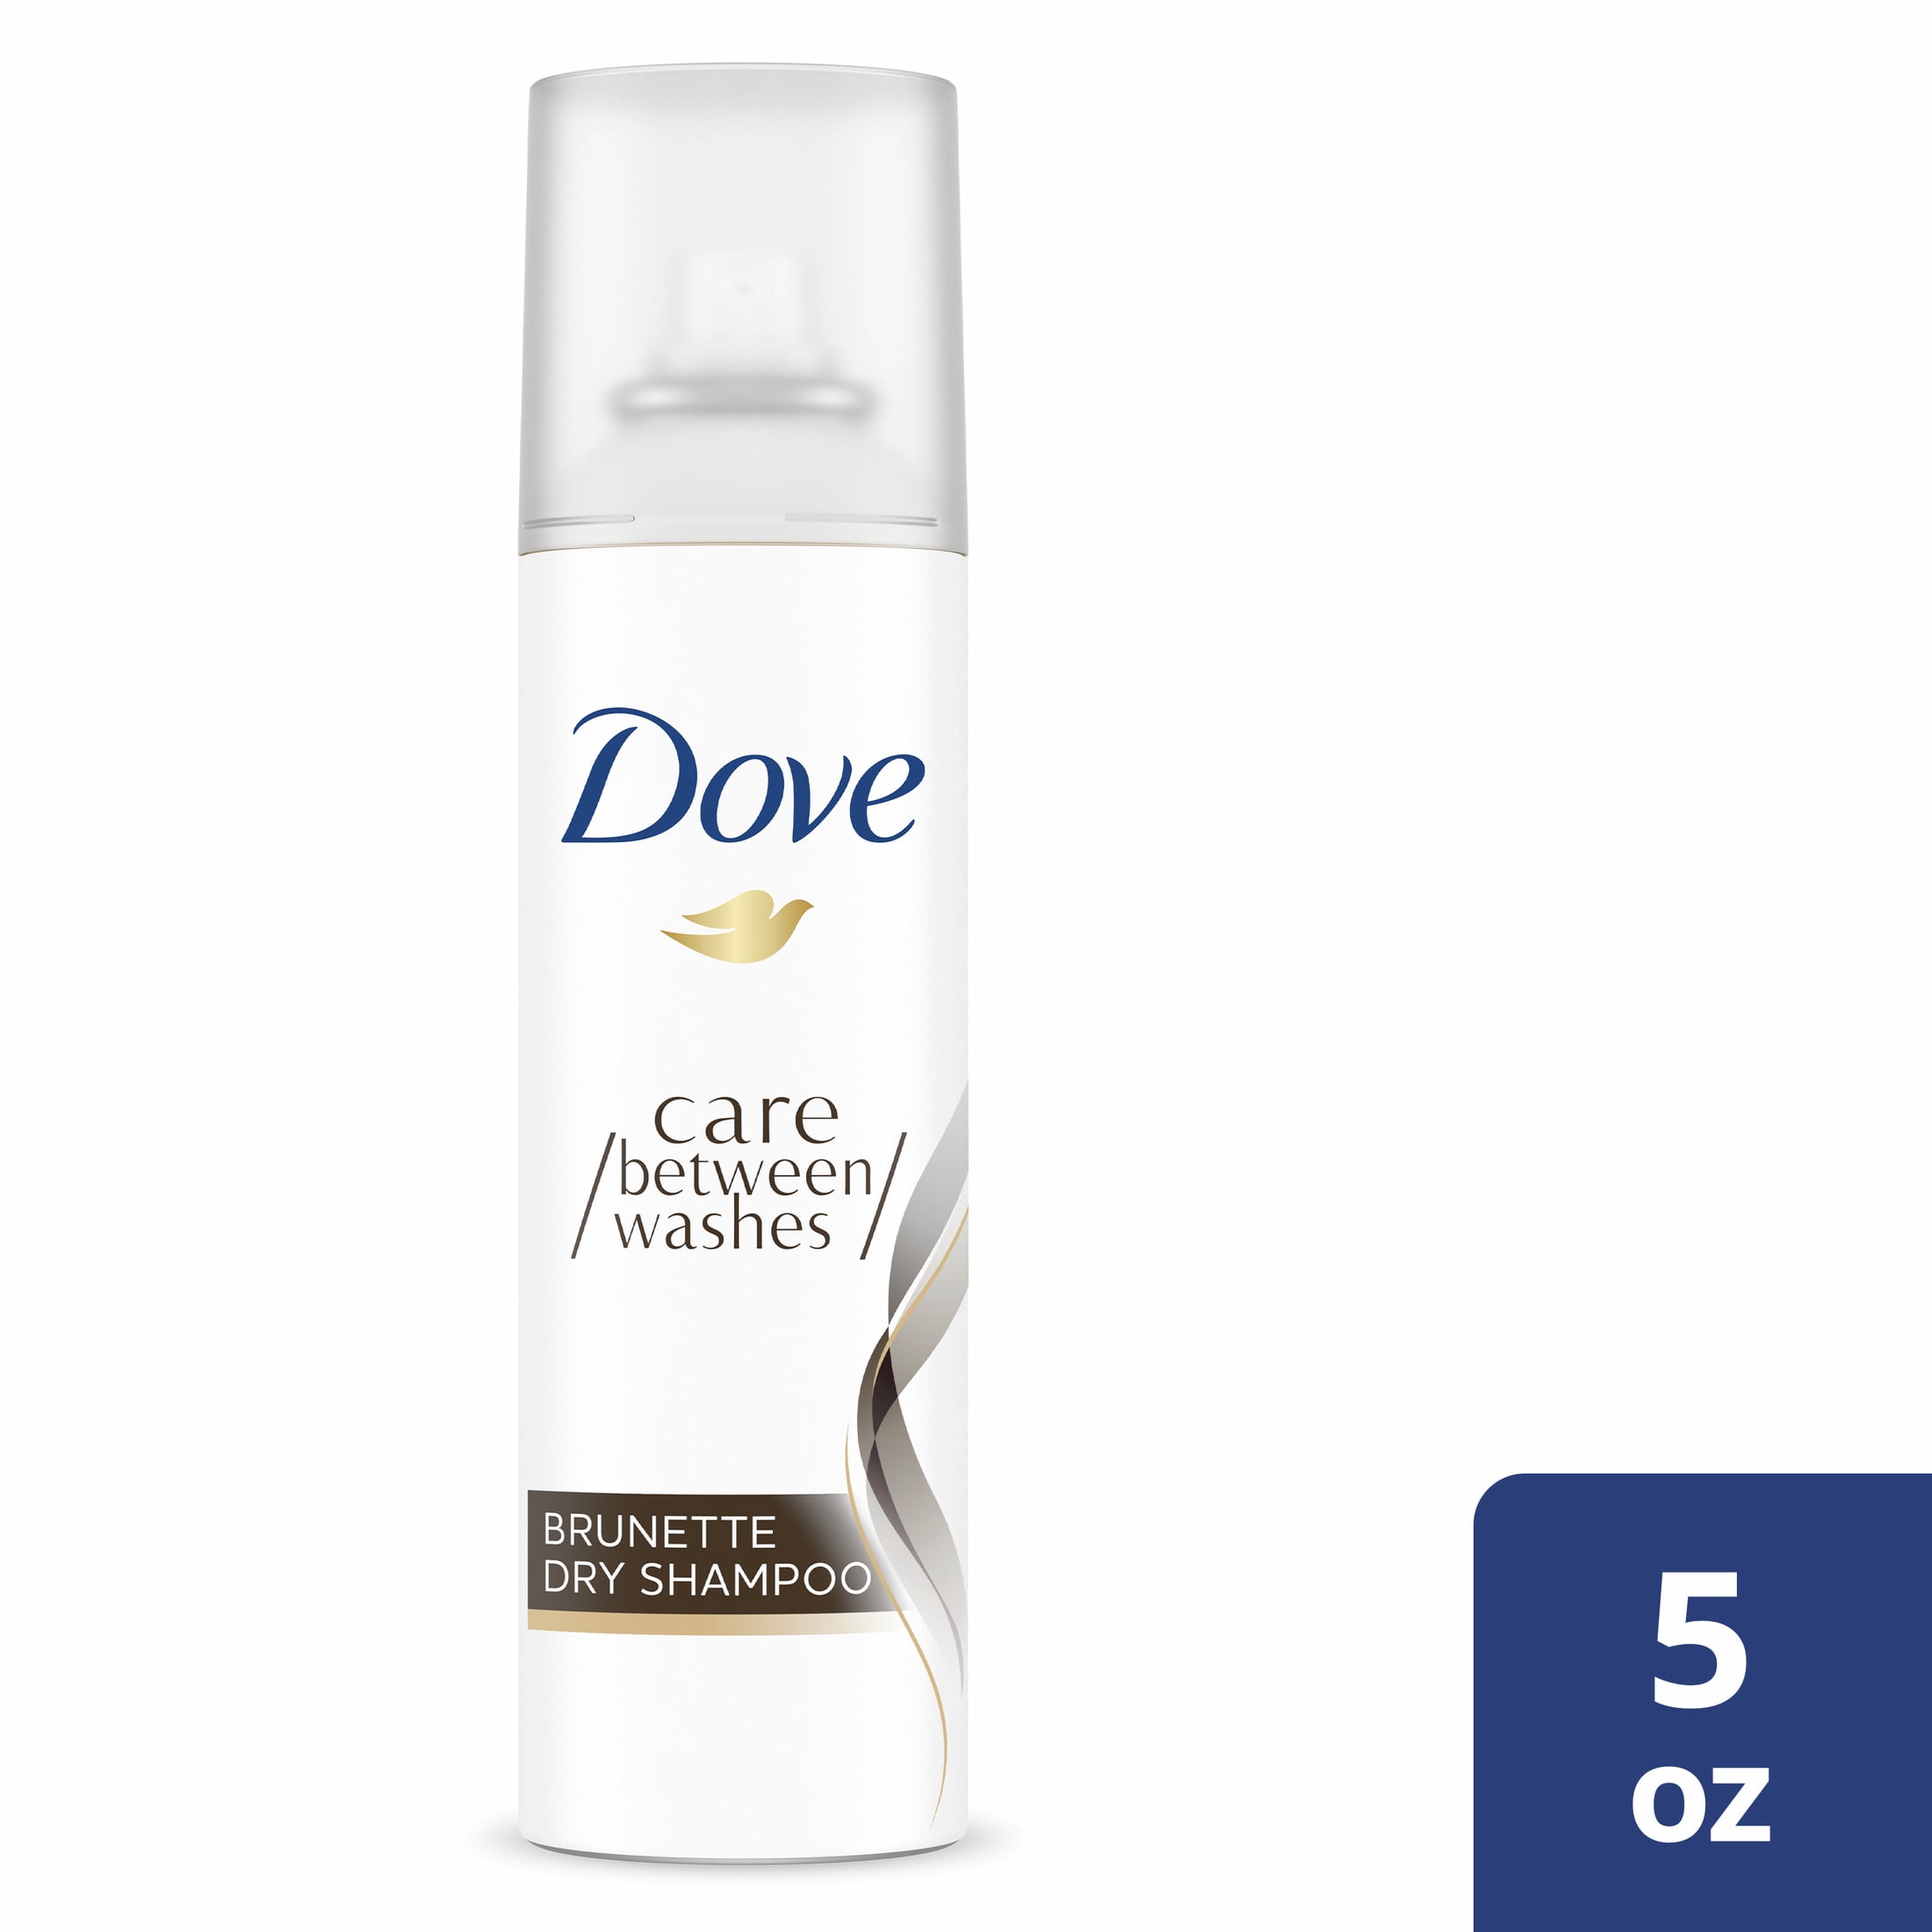 Dove Care Between Washes Dry Shampoo with Brunette Tint, 5 oz - Walmart.com